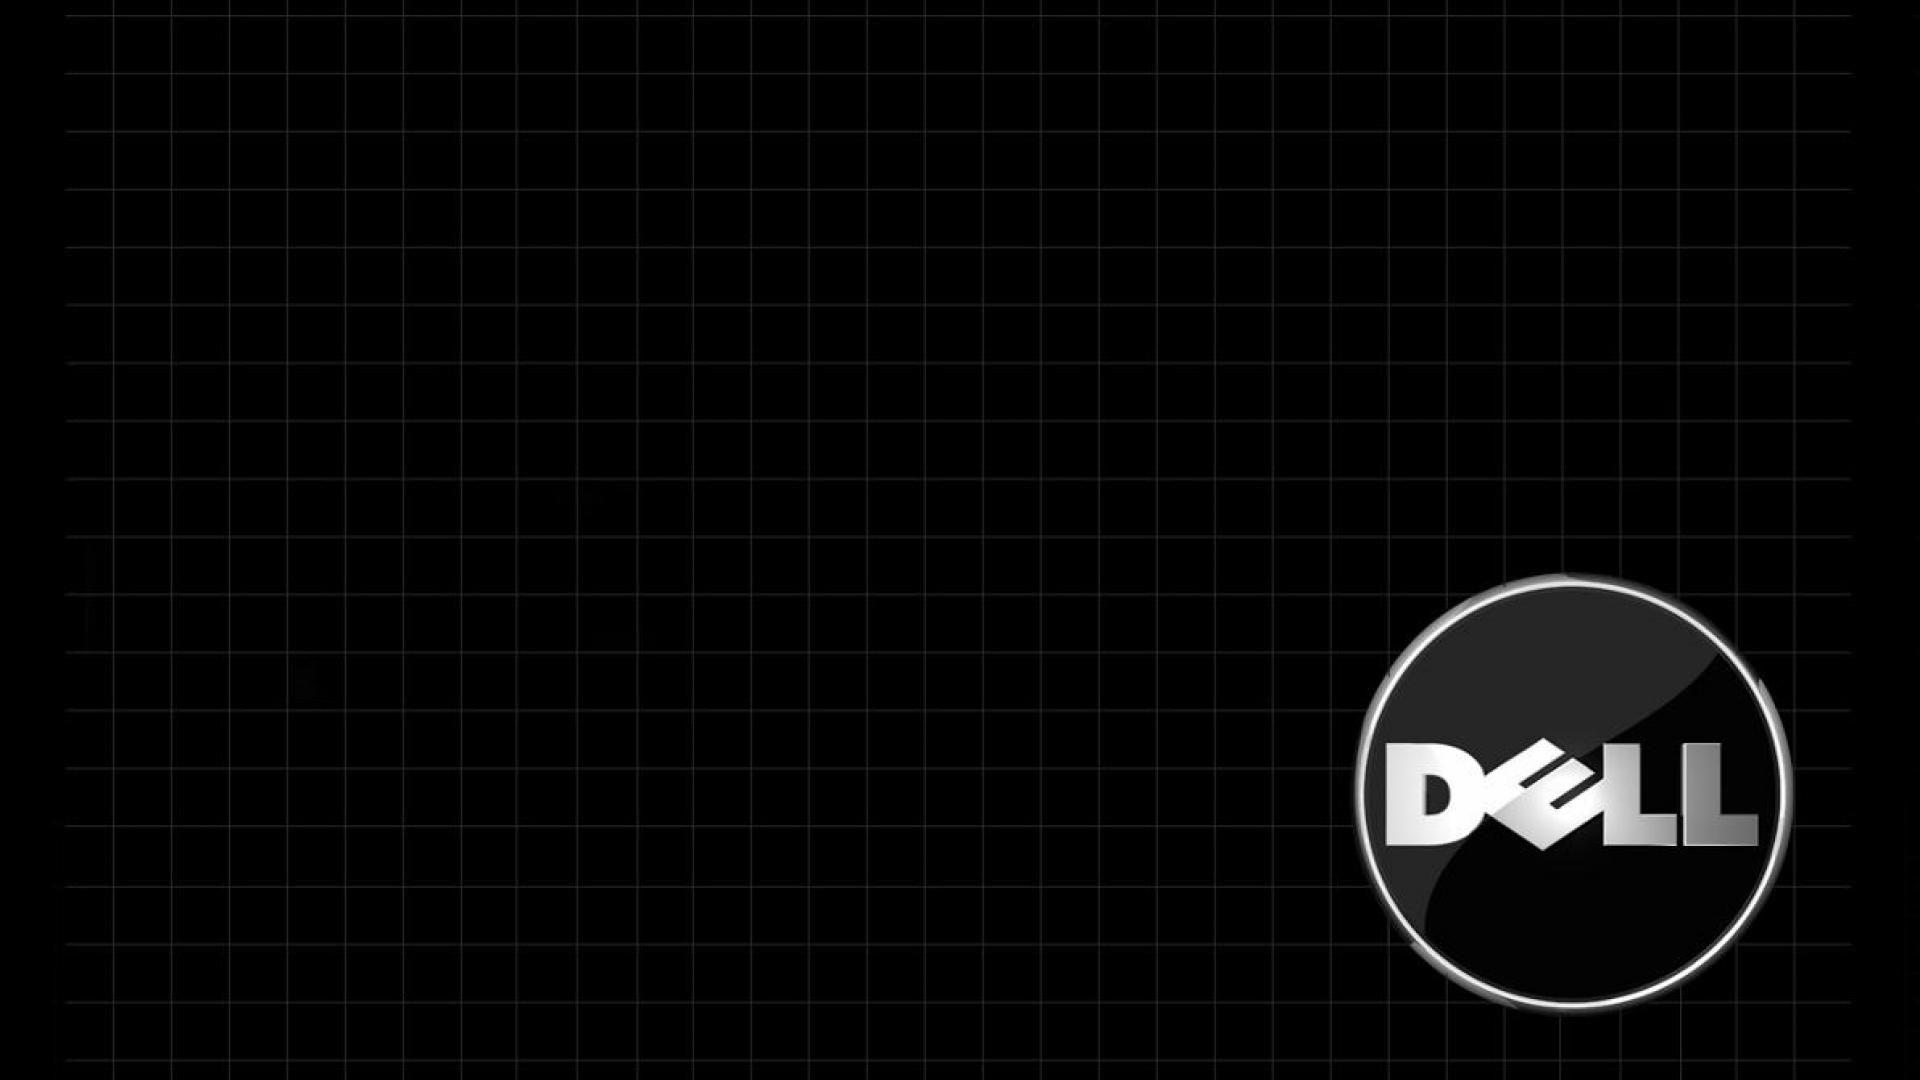 Dell Wallpaper For Free Download